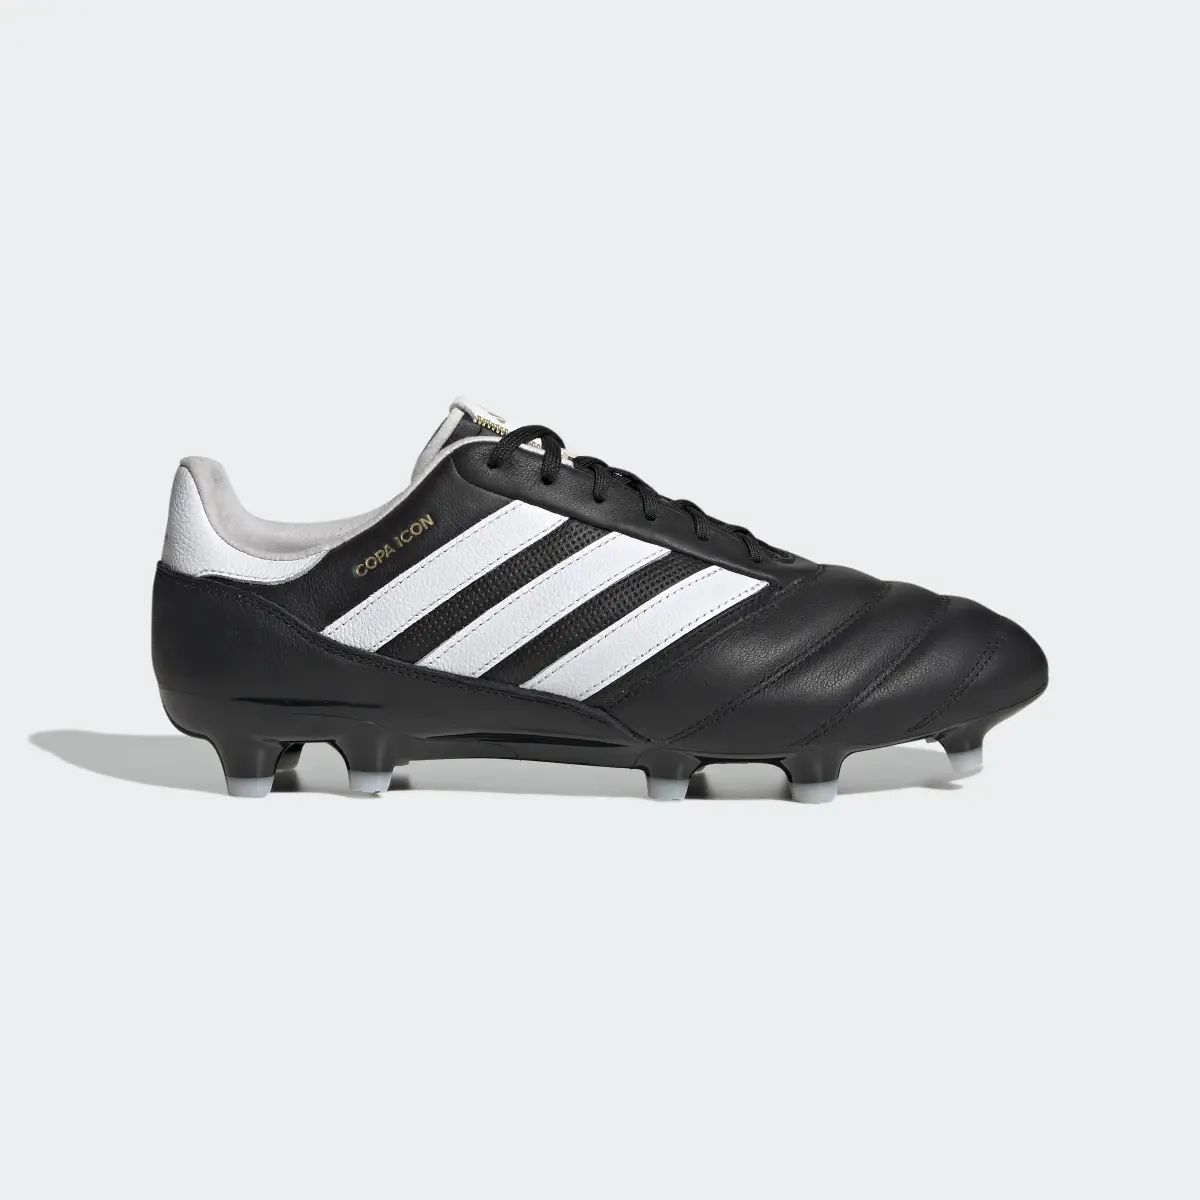 Adidas Copa Icon Firm Ground Boots. 2